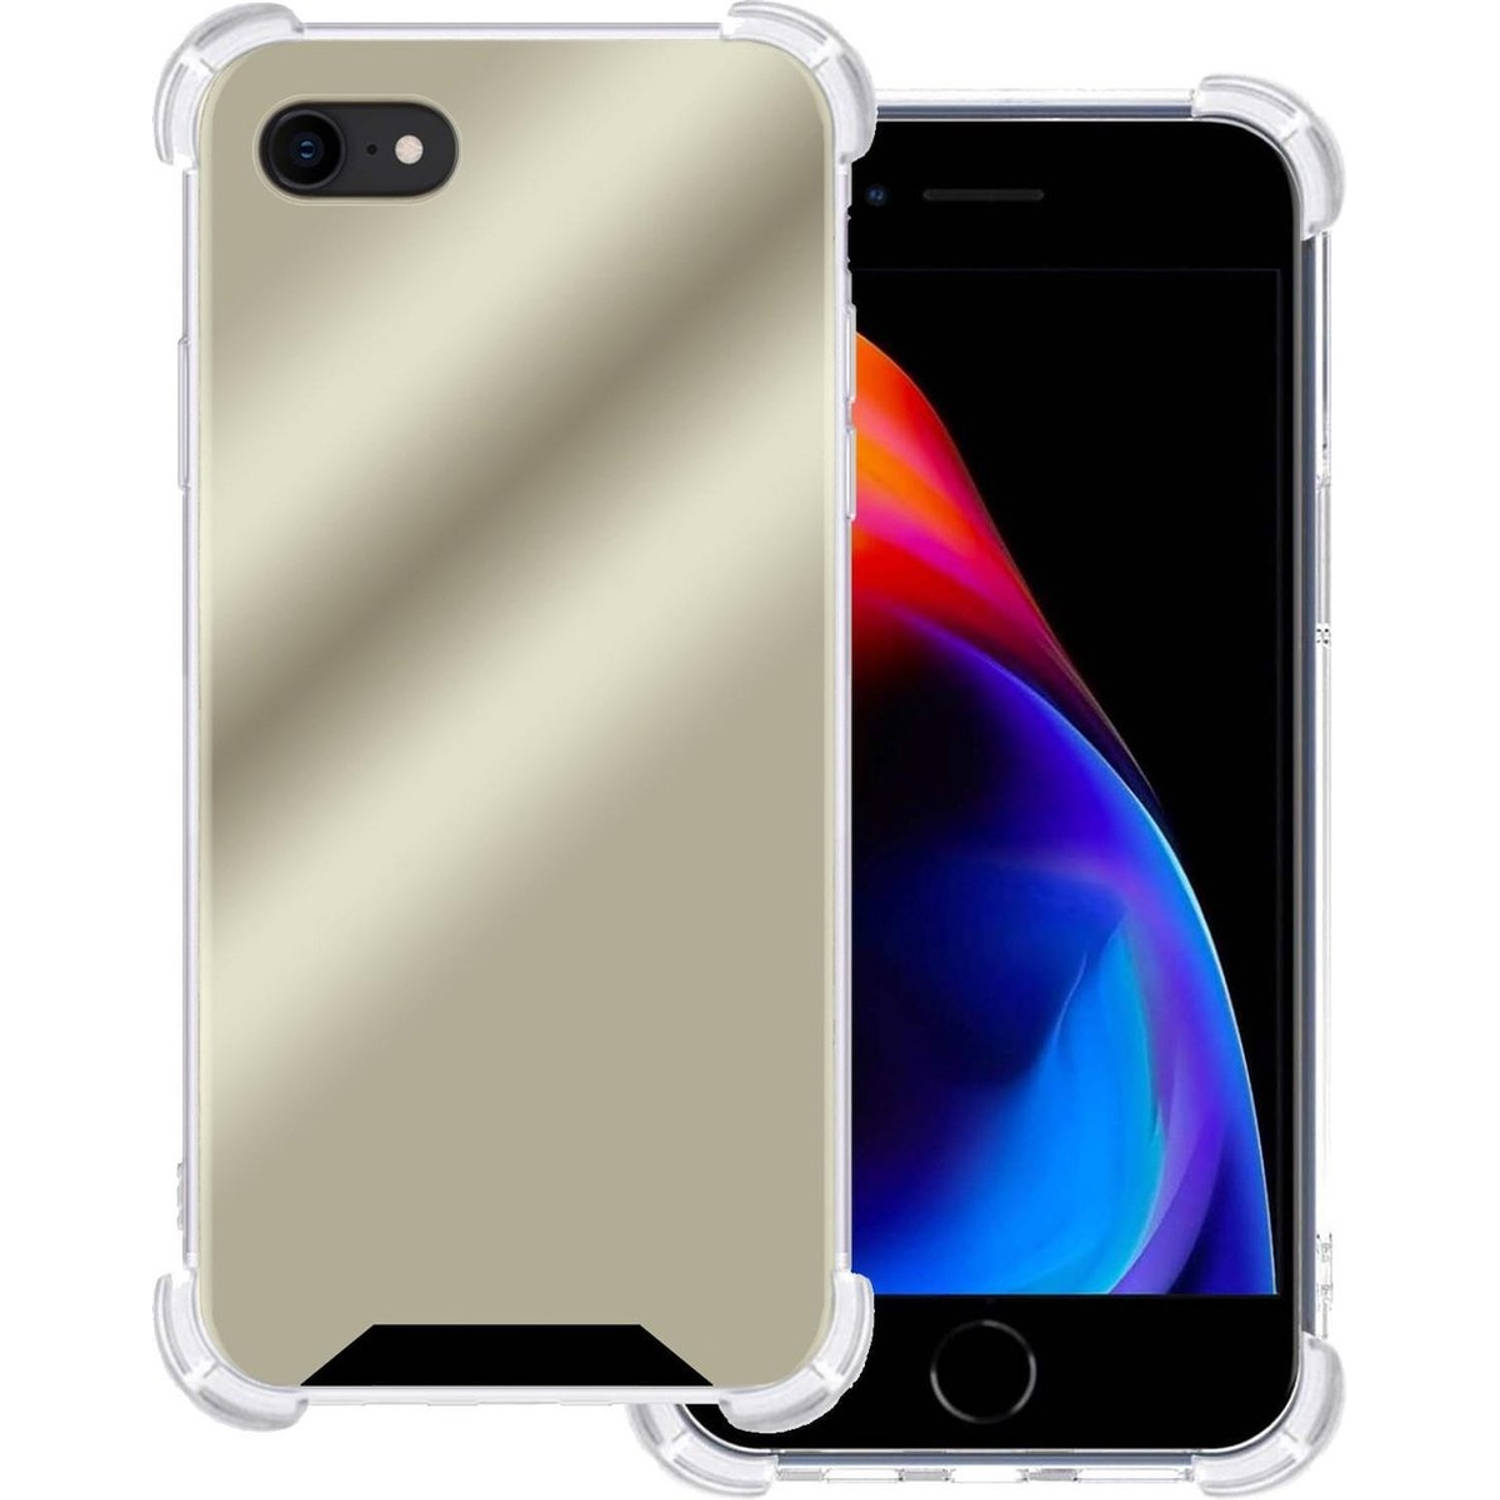 Basey Apple Iphone 8 Hoesje Siliconen Shock Proof Hoes Case Cover Goud